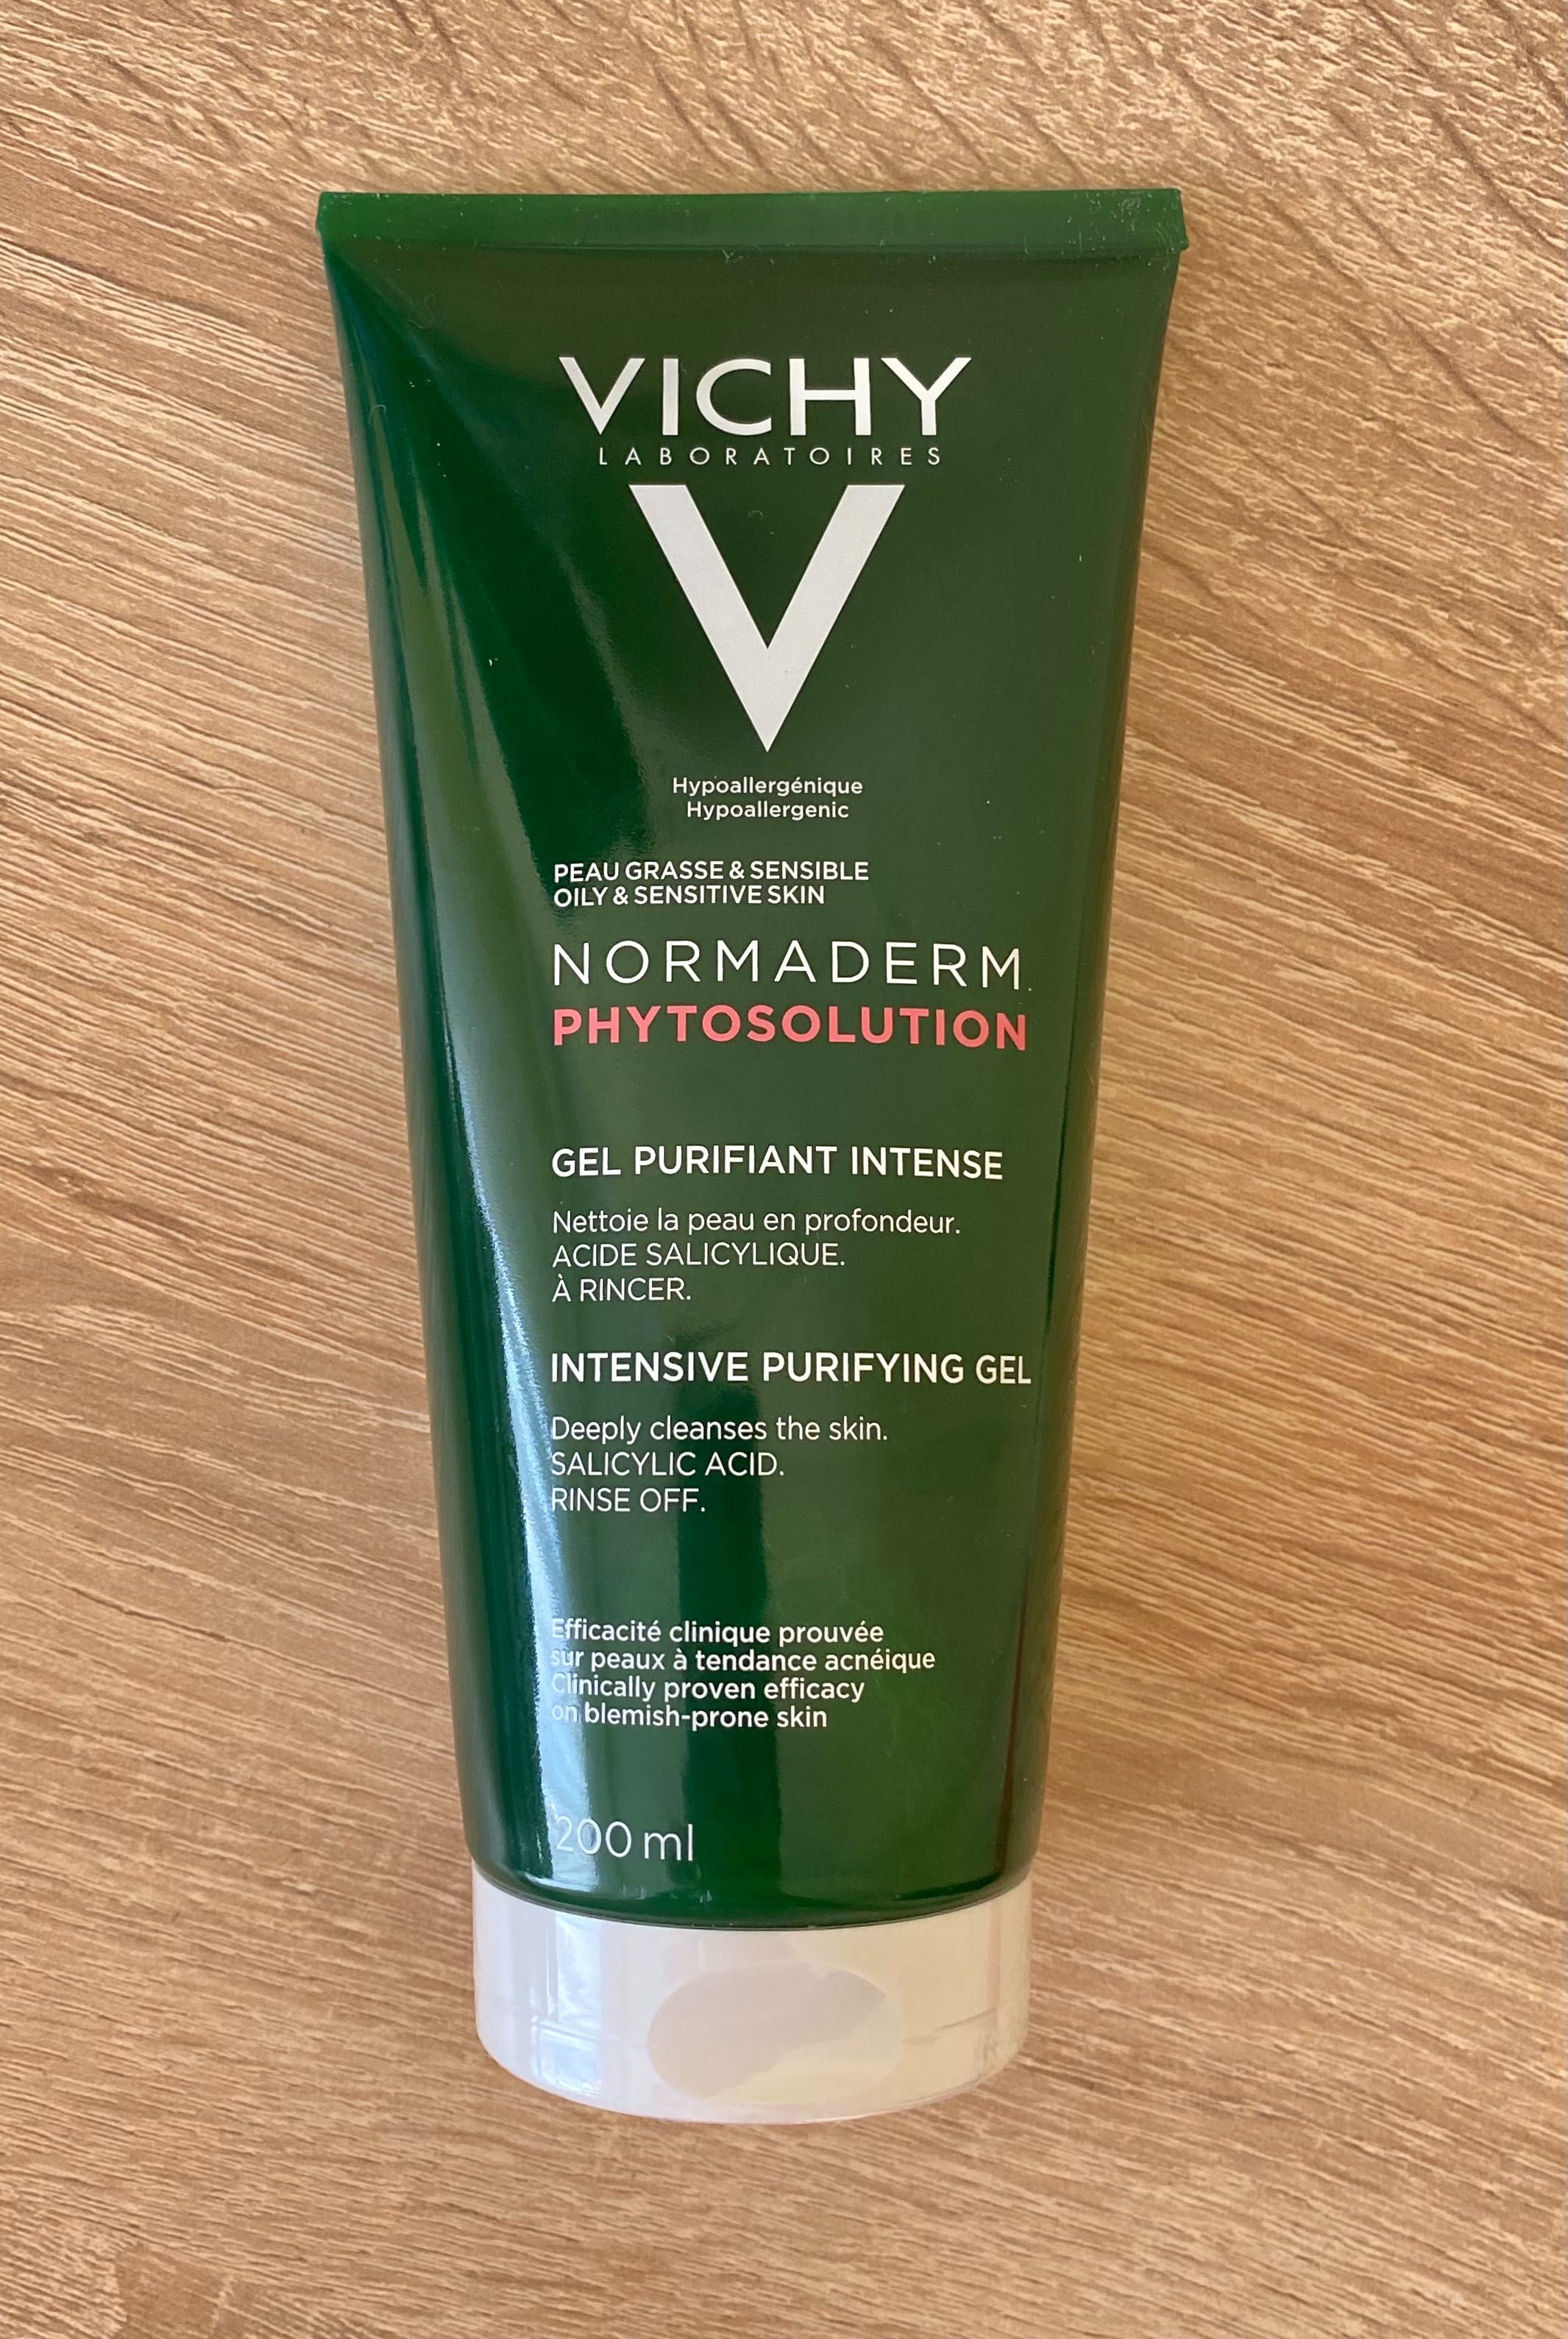 Normaderm phytosolution intensive purifying gel. Vichy Normaderm phytosolution. Виши умывалка Normaderm. Vichy Normaderm phytosolution Intensive Purifying Gel. Vichy Normaderm phytosolution гель.